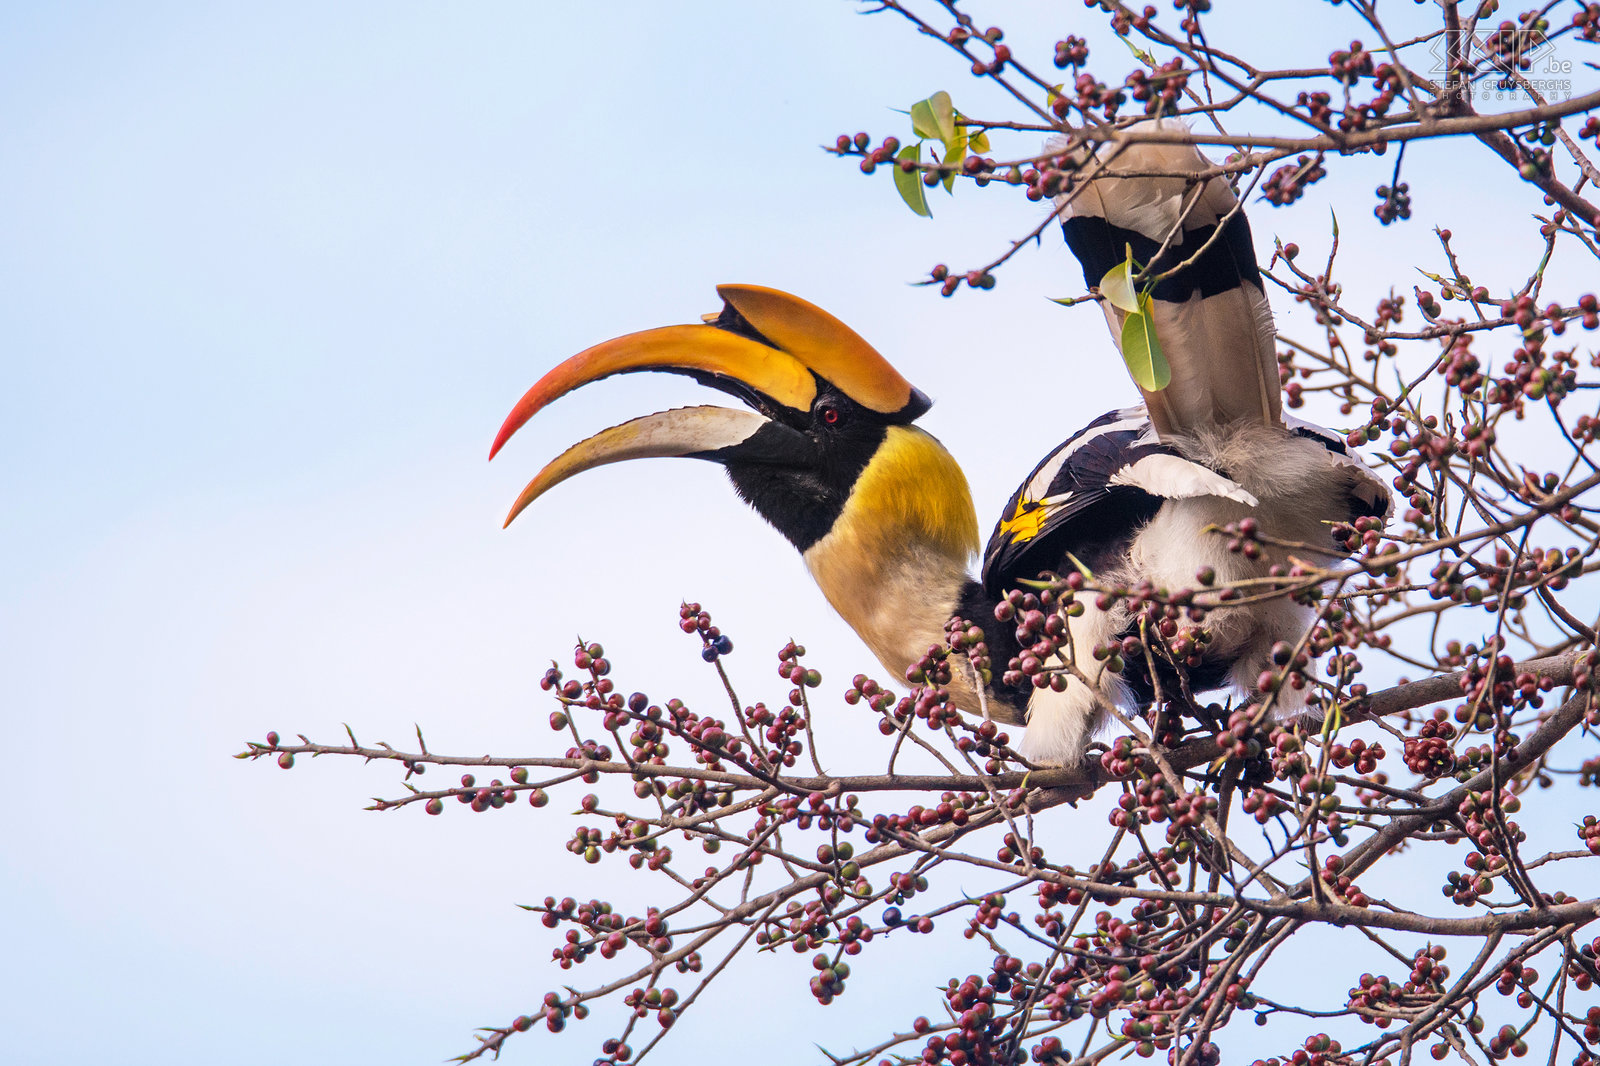 Valparai - Great Indian hornbill Great Indian hornbills (Buceros bicornis) are predominantly frugivorous, but they also eat small mammals, reptiles and birds. During the breeding season the male brings food to the female in the nest. Stefan Cruysberghs